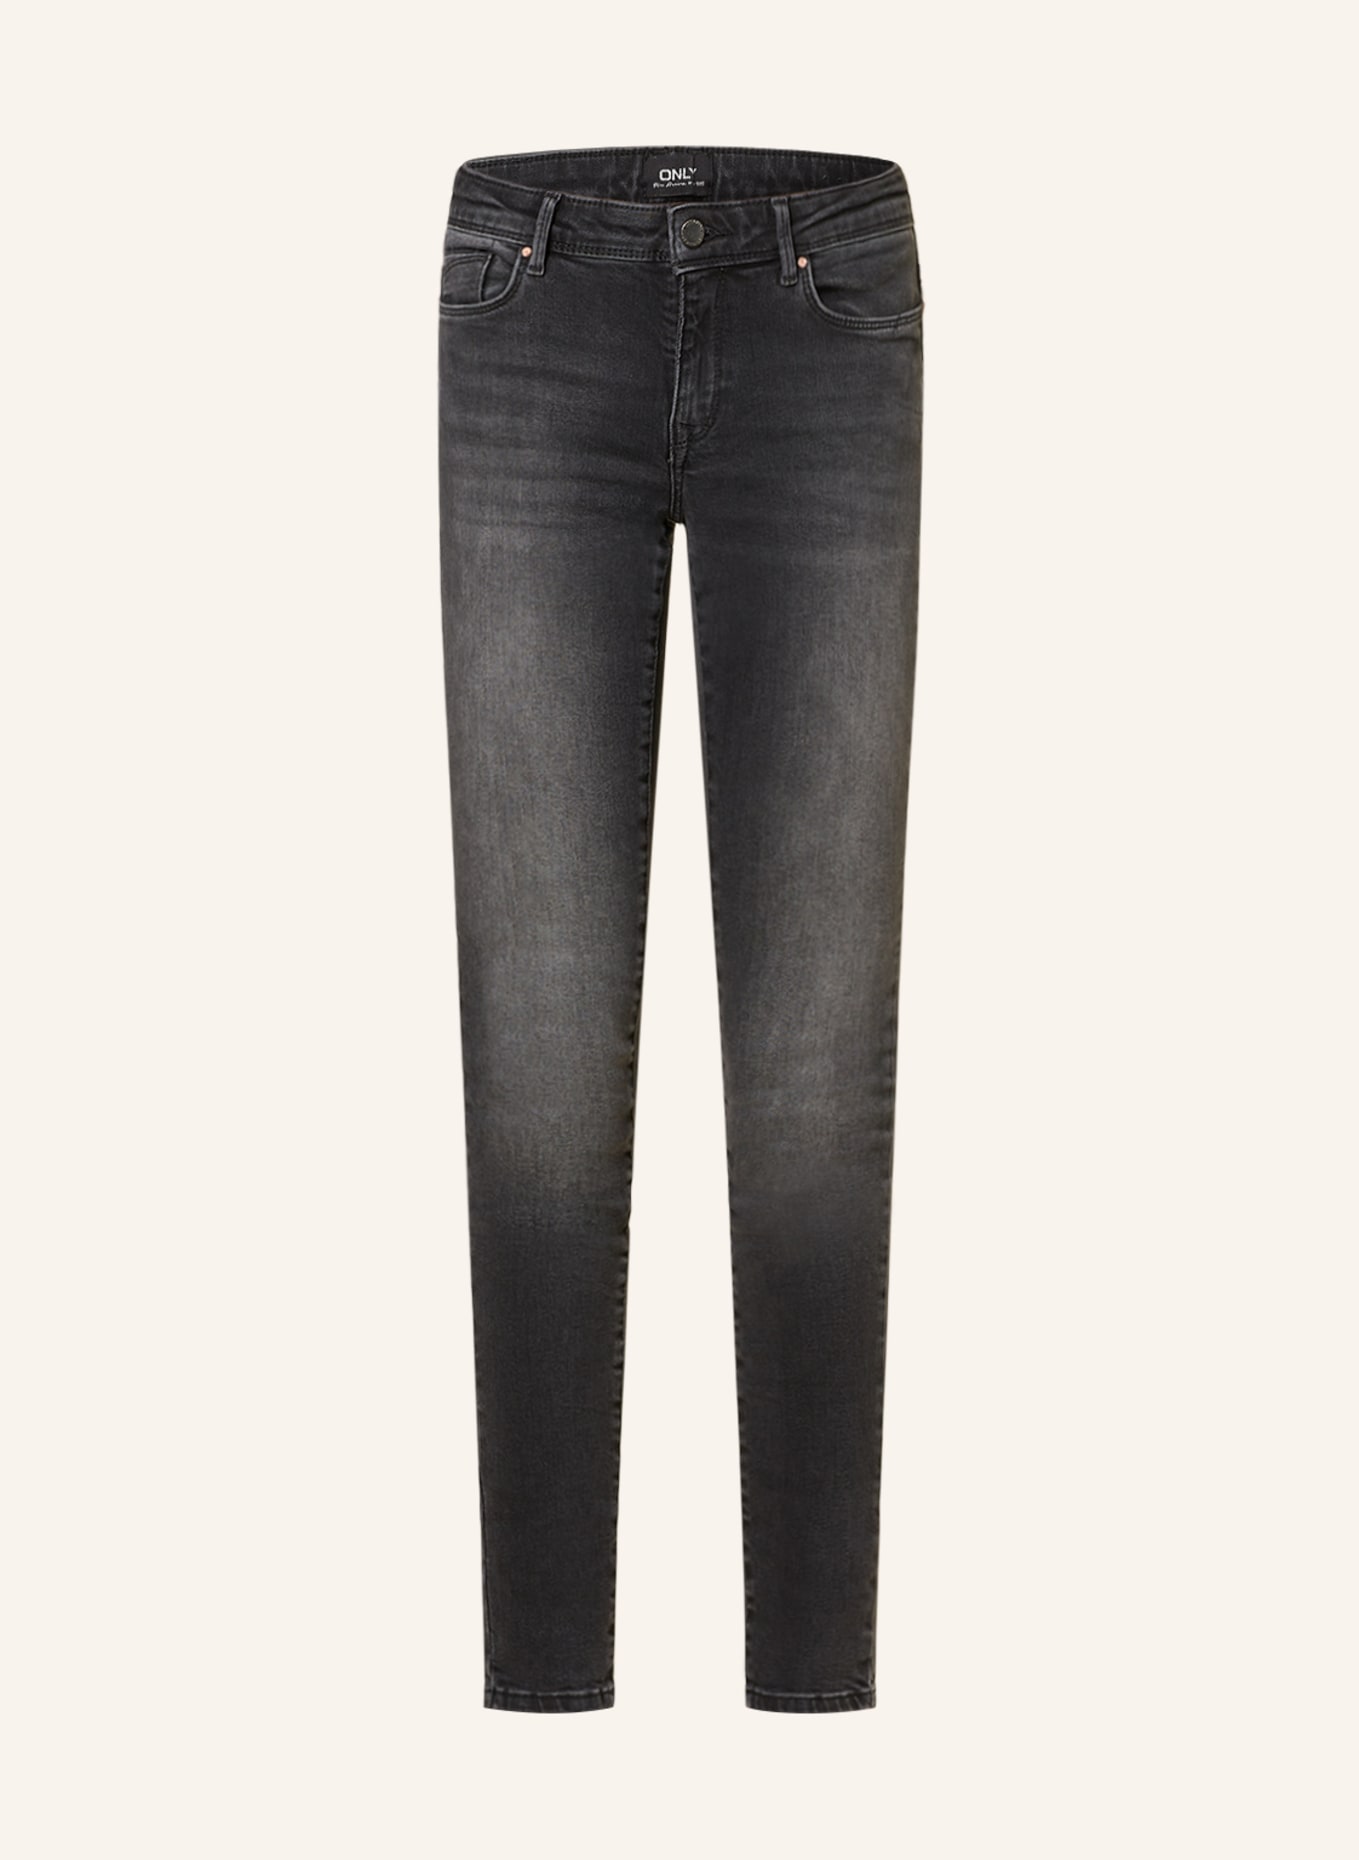 ONLY Skinny Jeans, Farbe: WASHED BLACK (Bild 1)